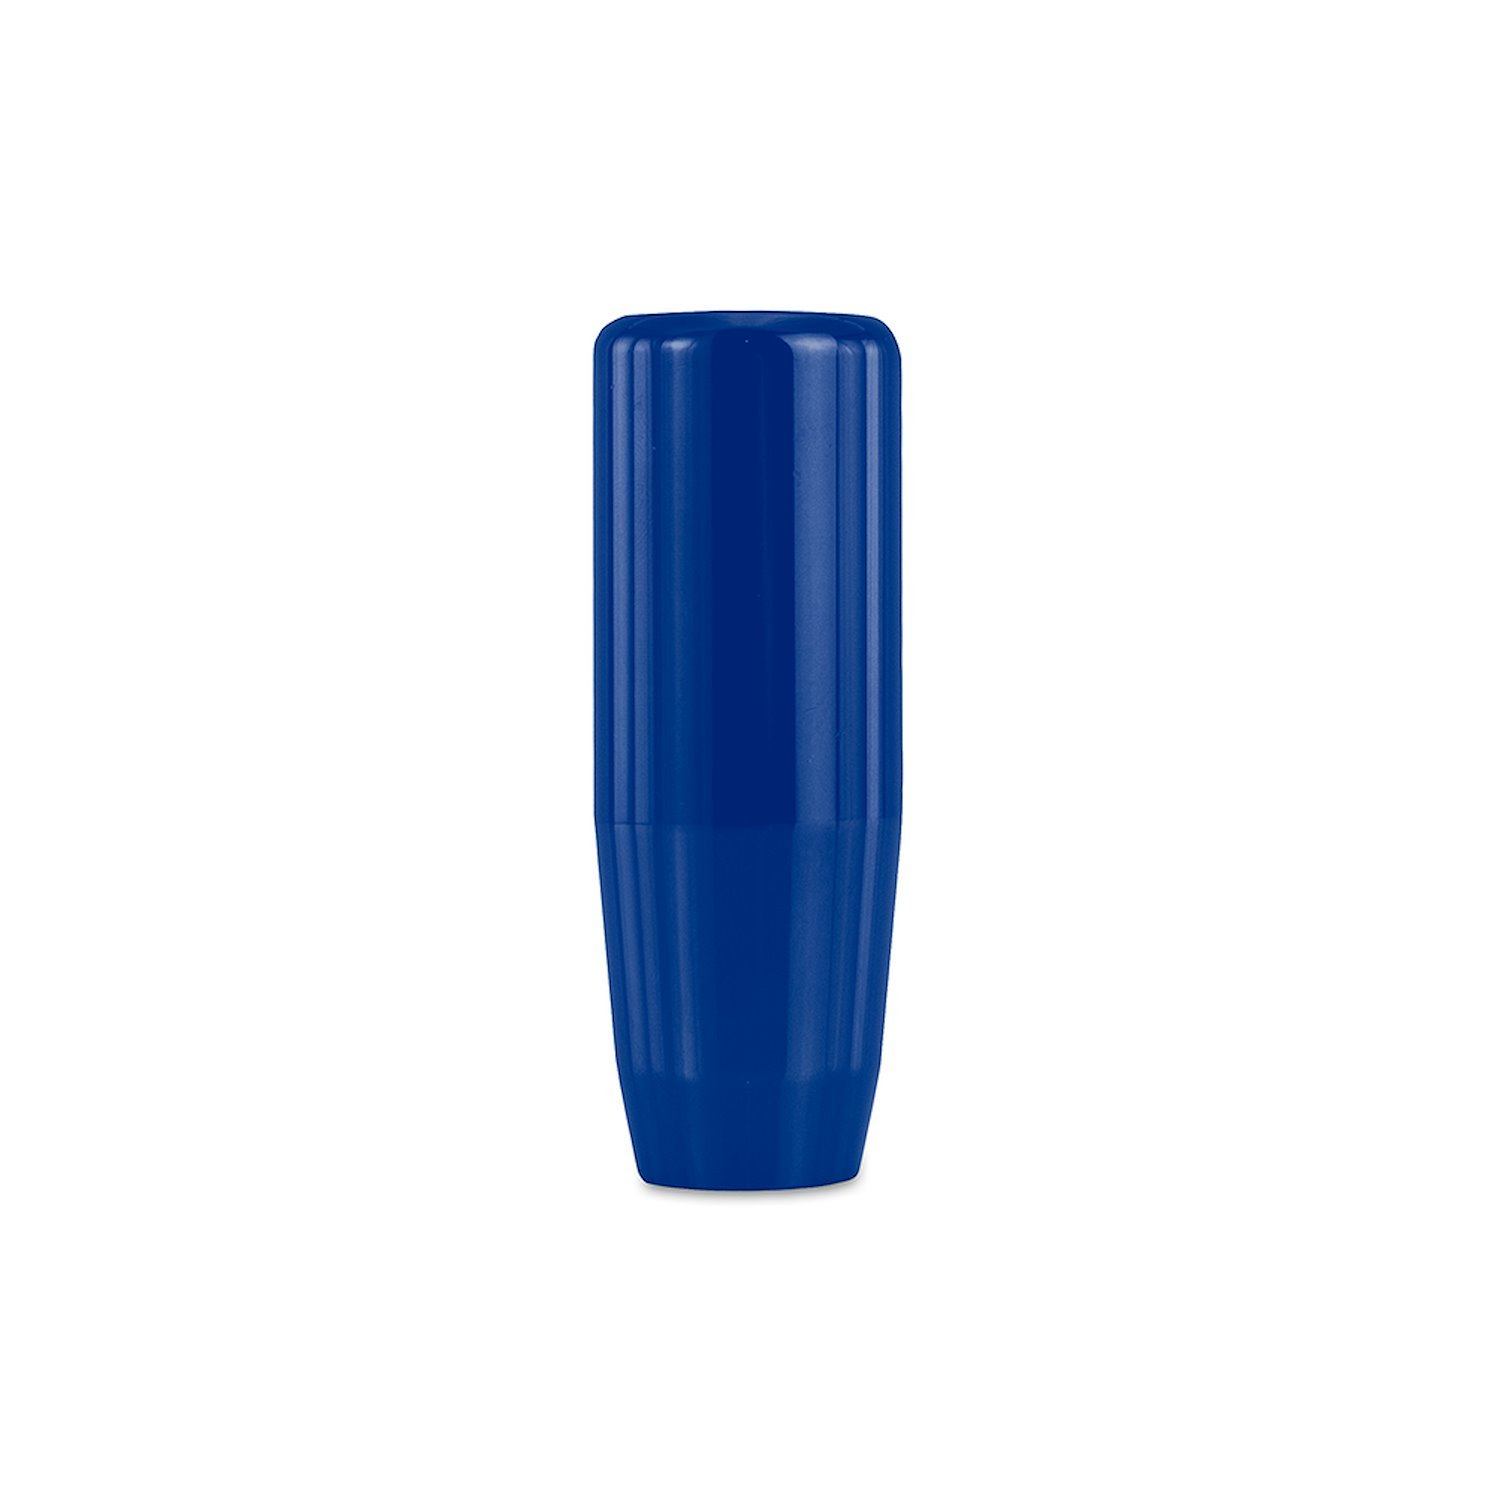 WEIGHTED SHIFT KNOB BLUE